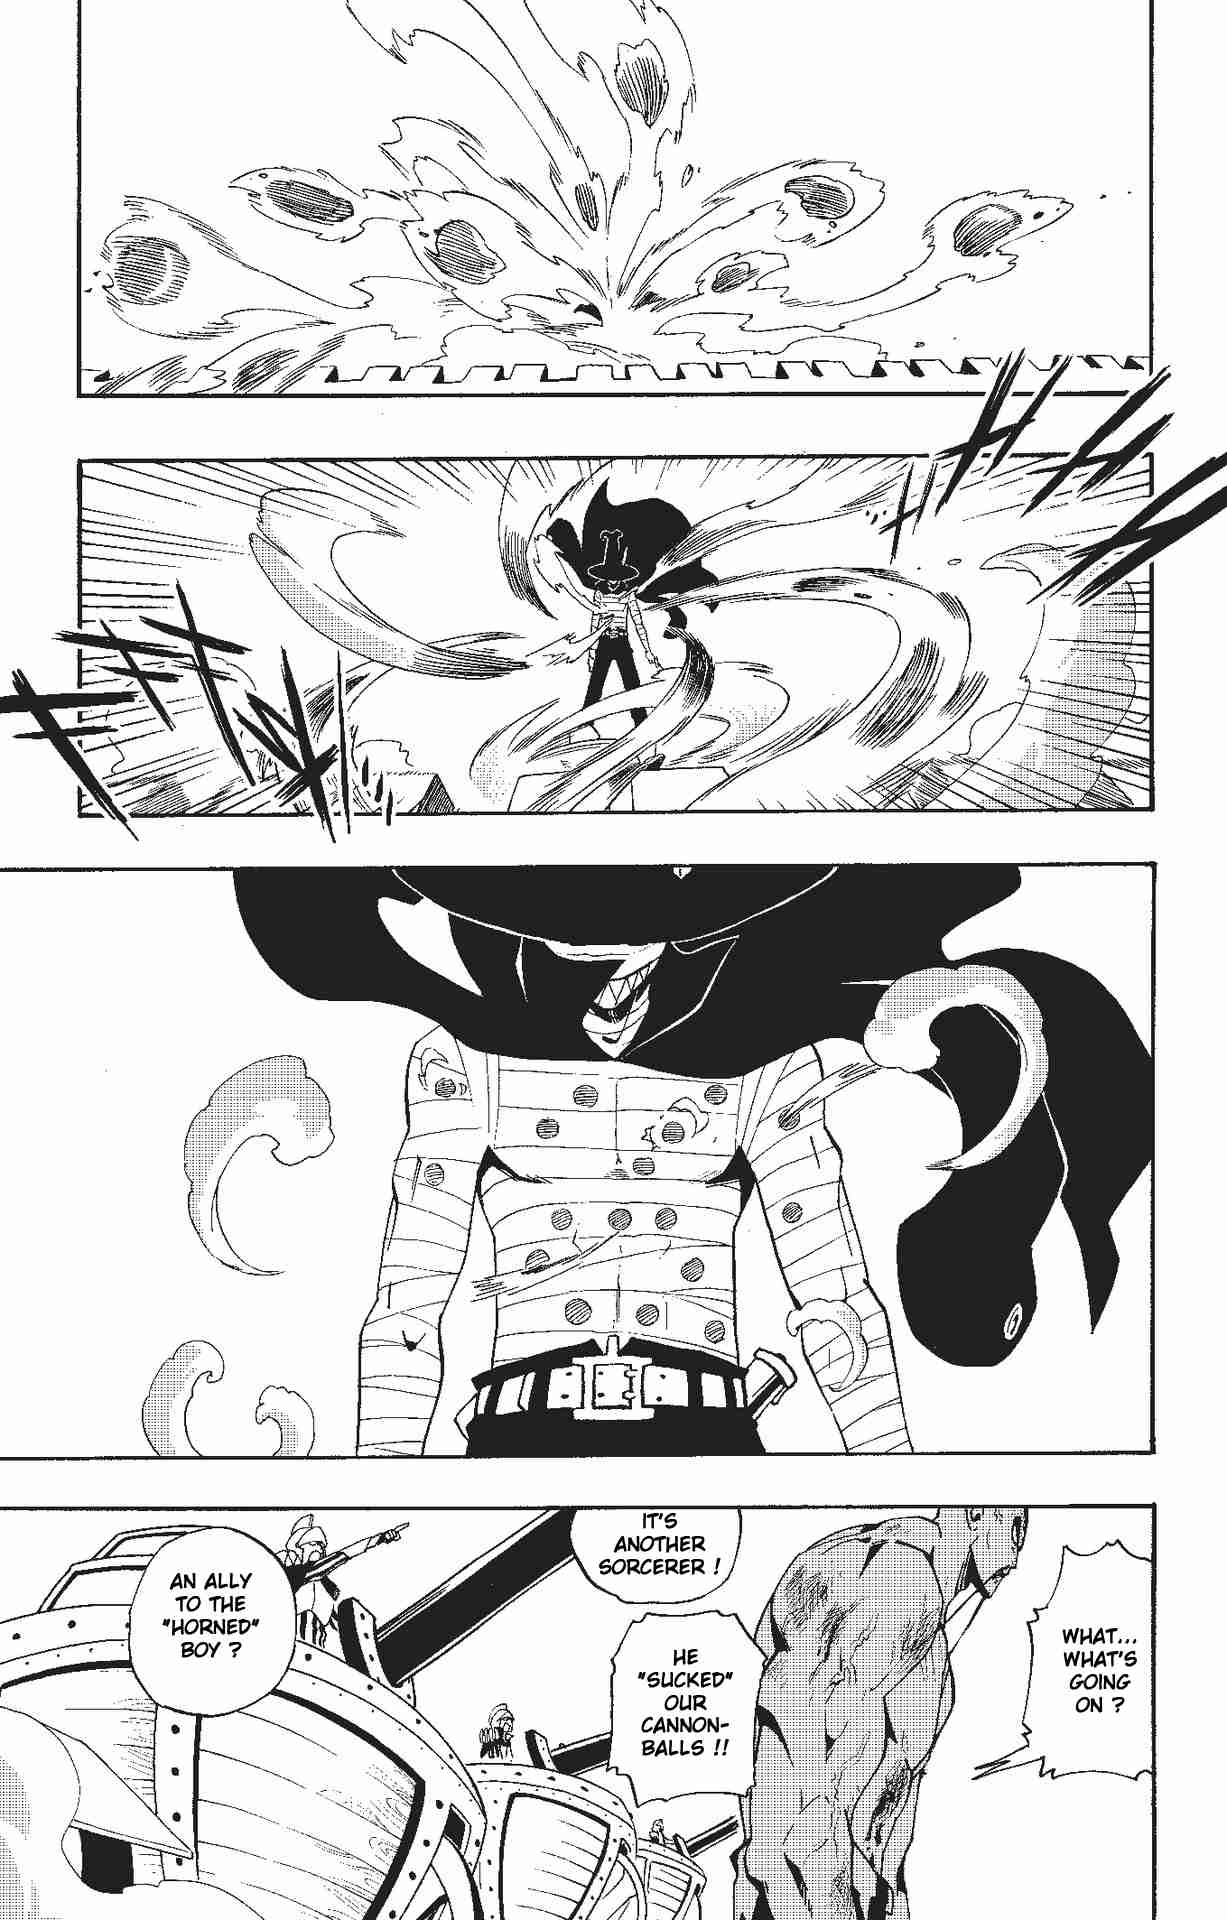 Radiant Vol. 2 Ch. 12 Here comes a new Challenger